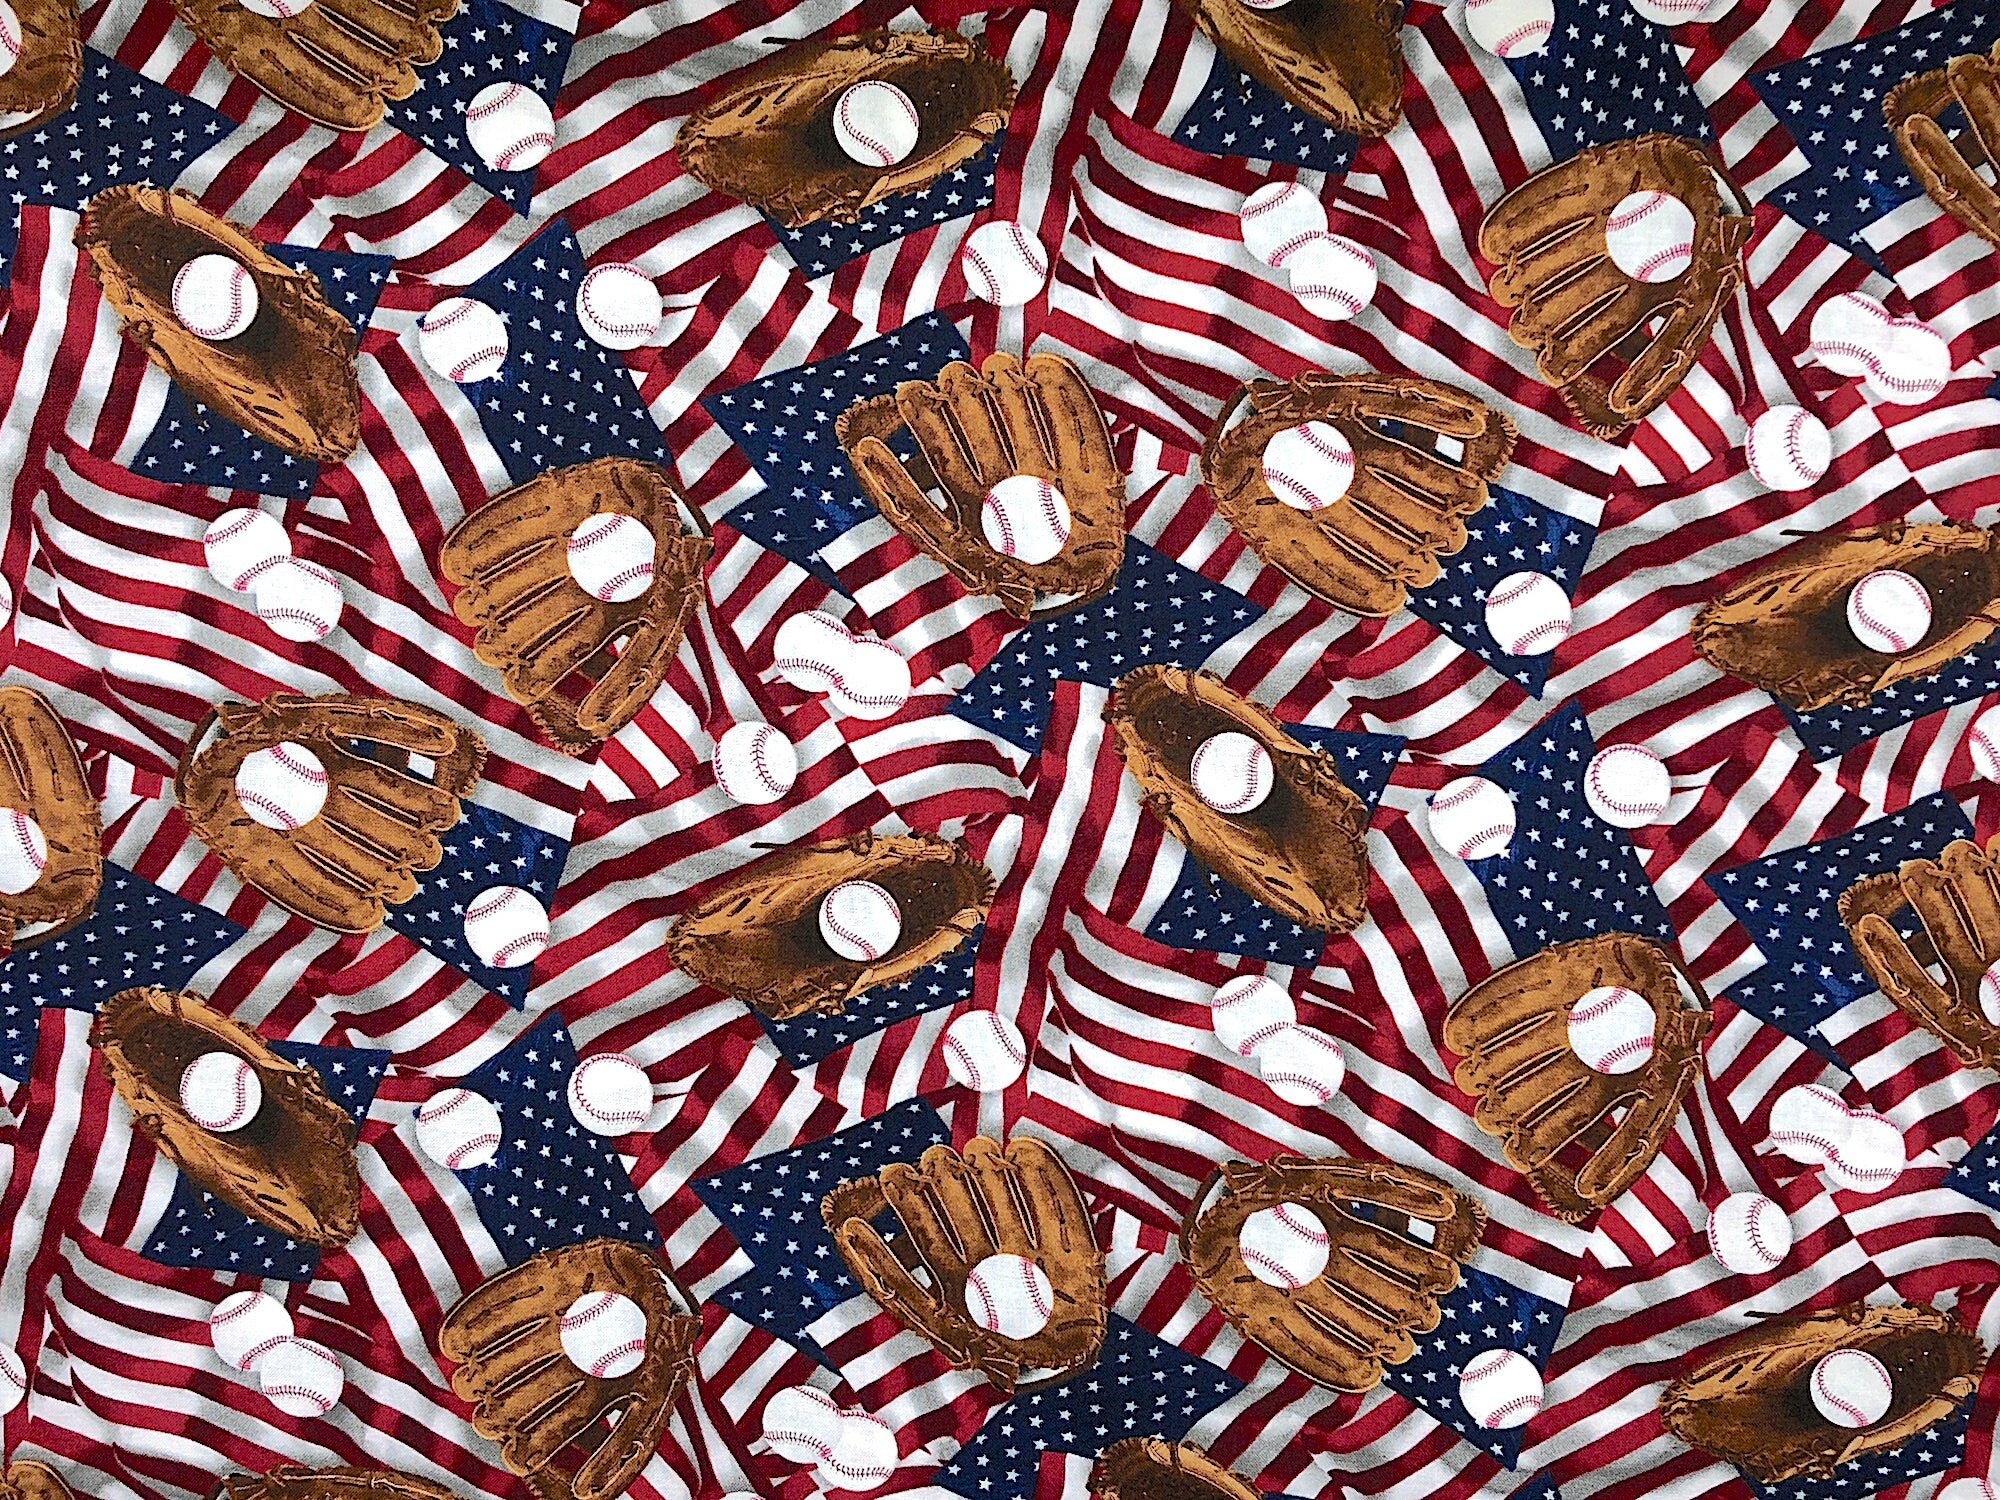 Cotton fabric covered with USA flags, baseball mitts and balls.